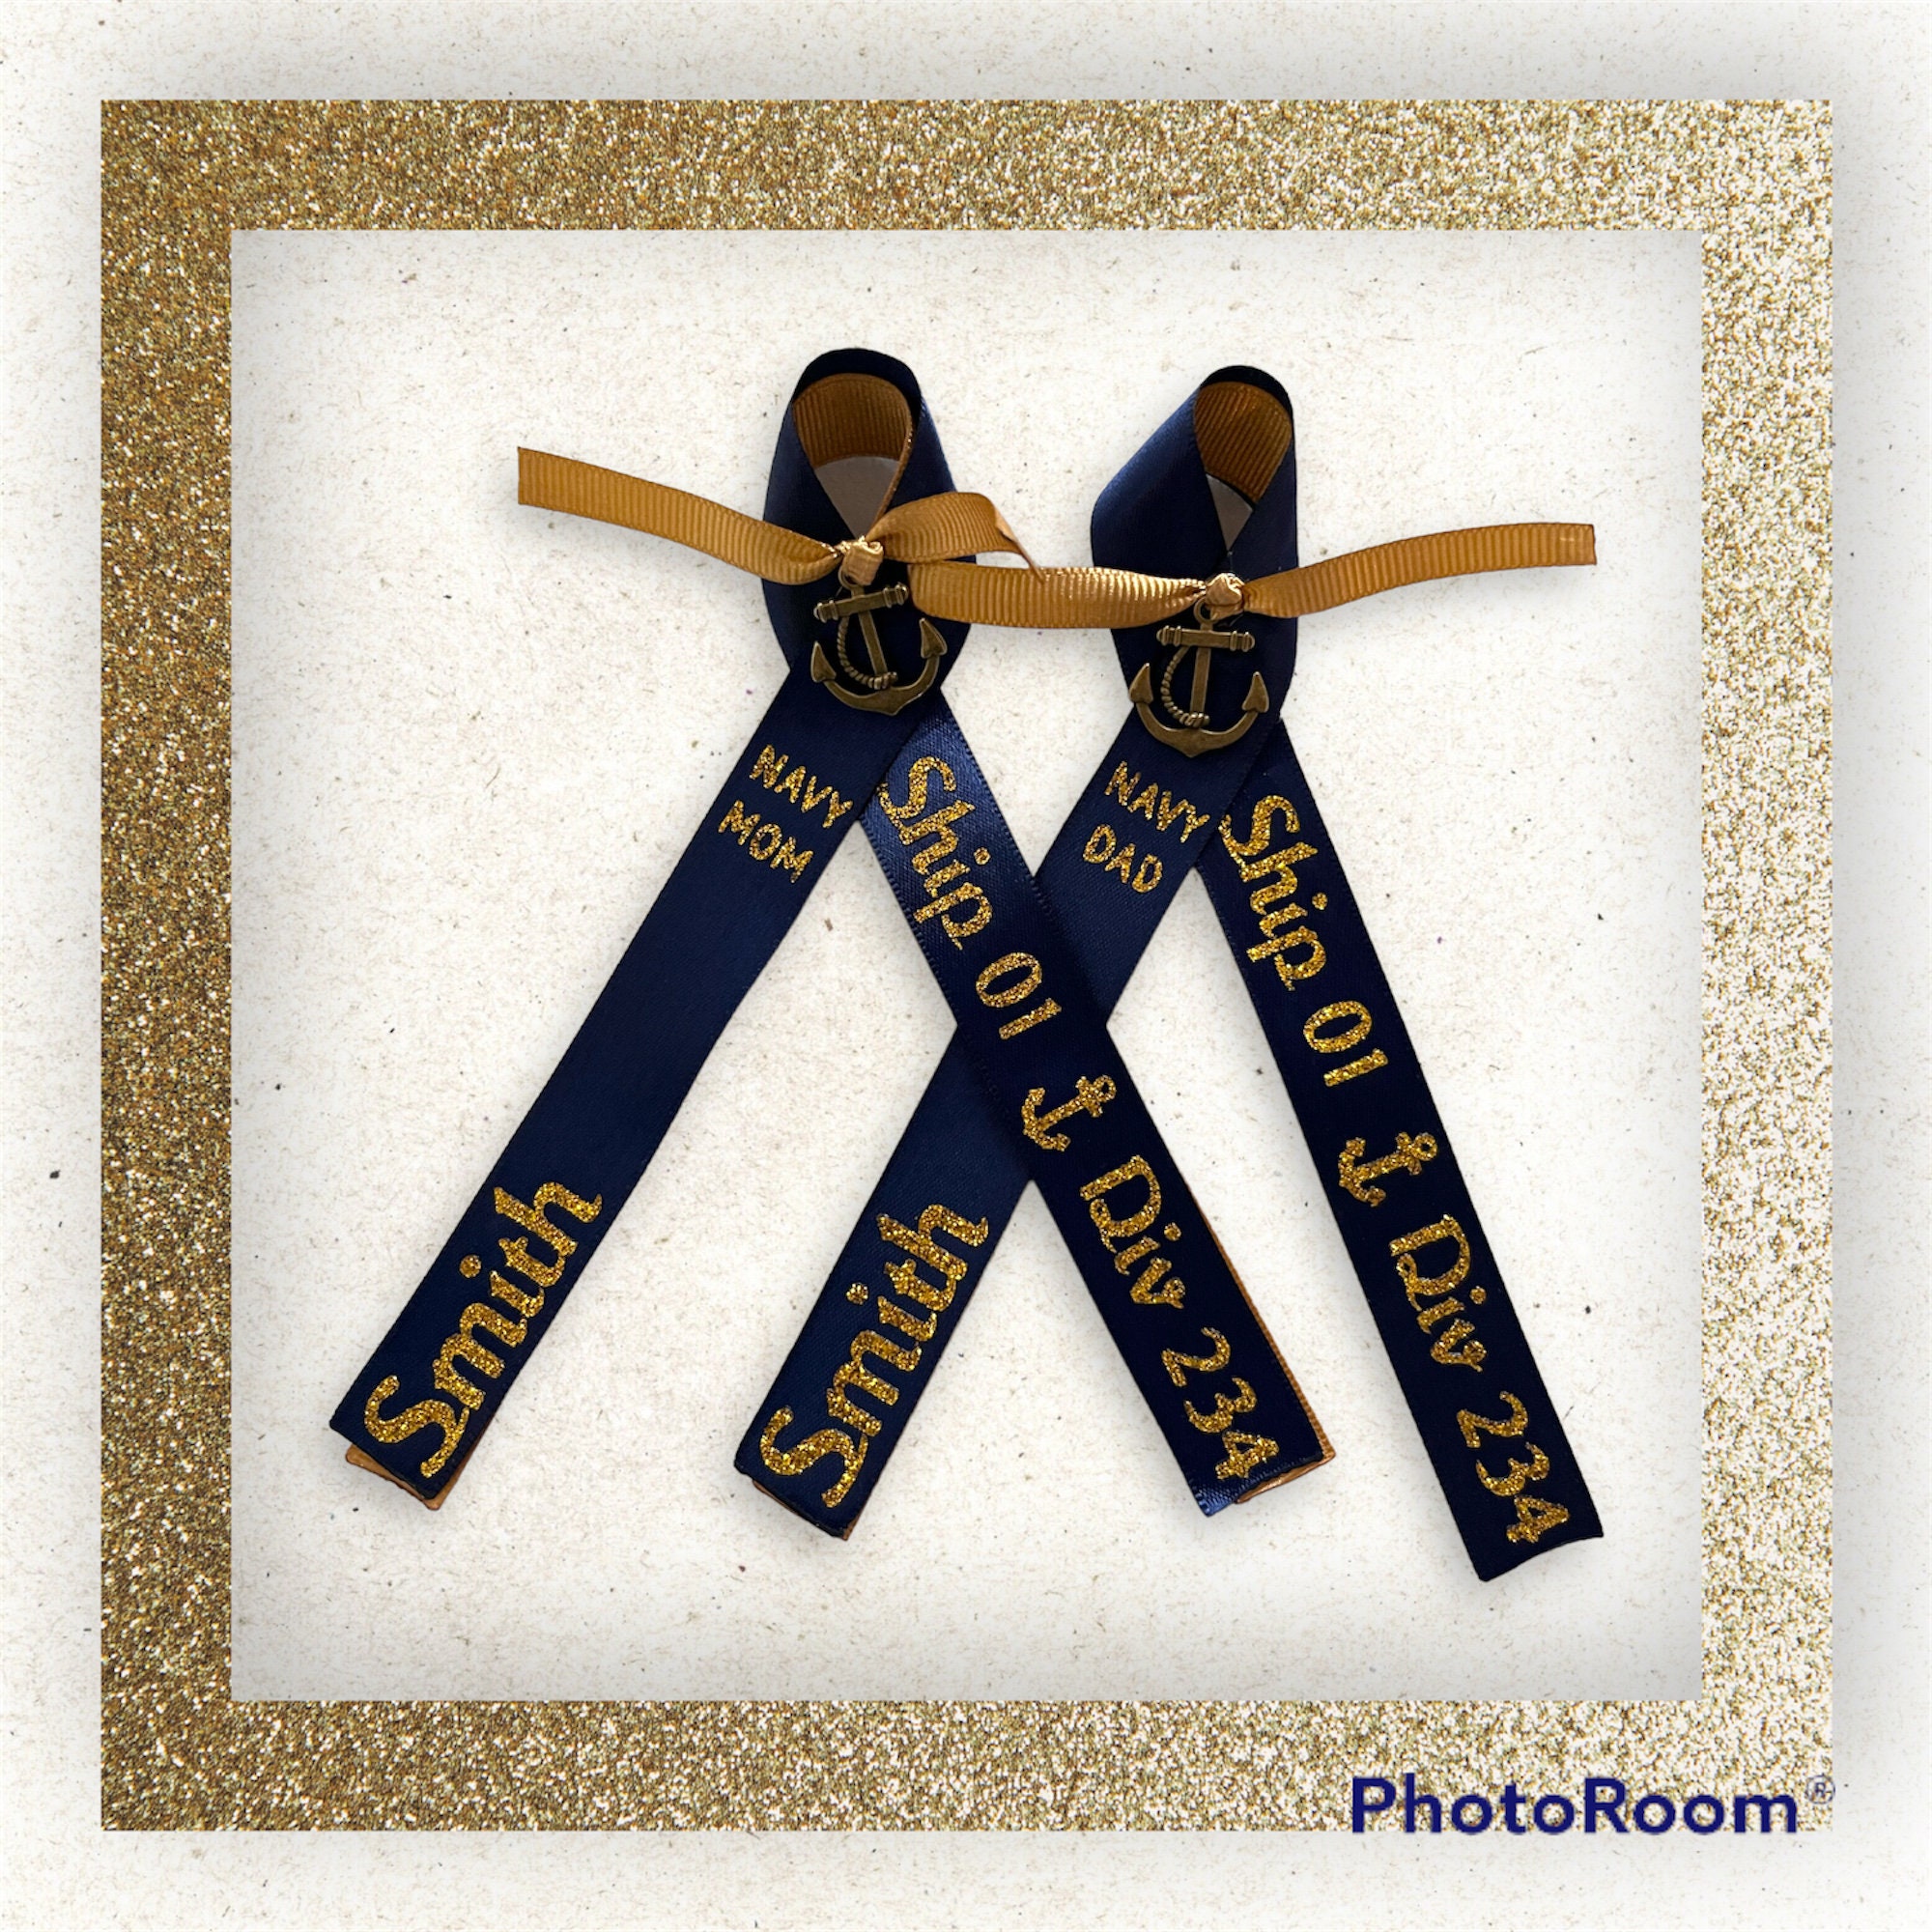 New ribbon unveiled for Navy boot camp's best